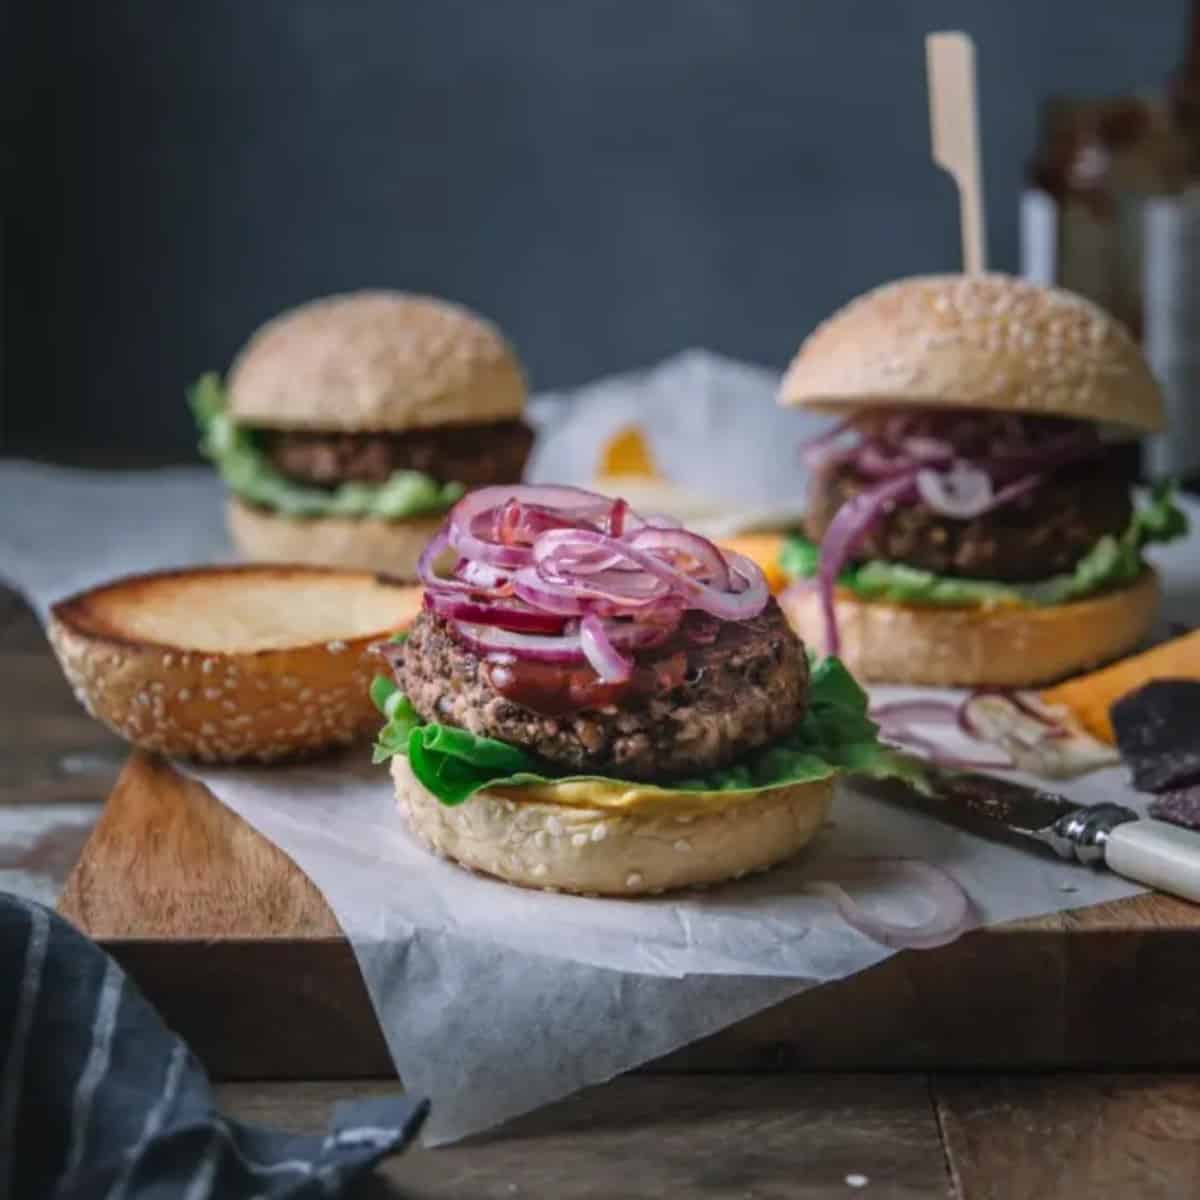 black bean burgers topped with red onion and sauce with other burgers in background.